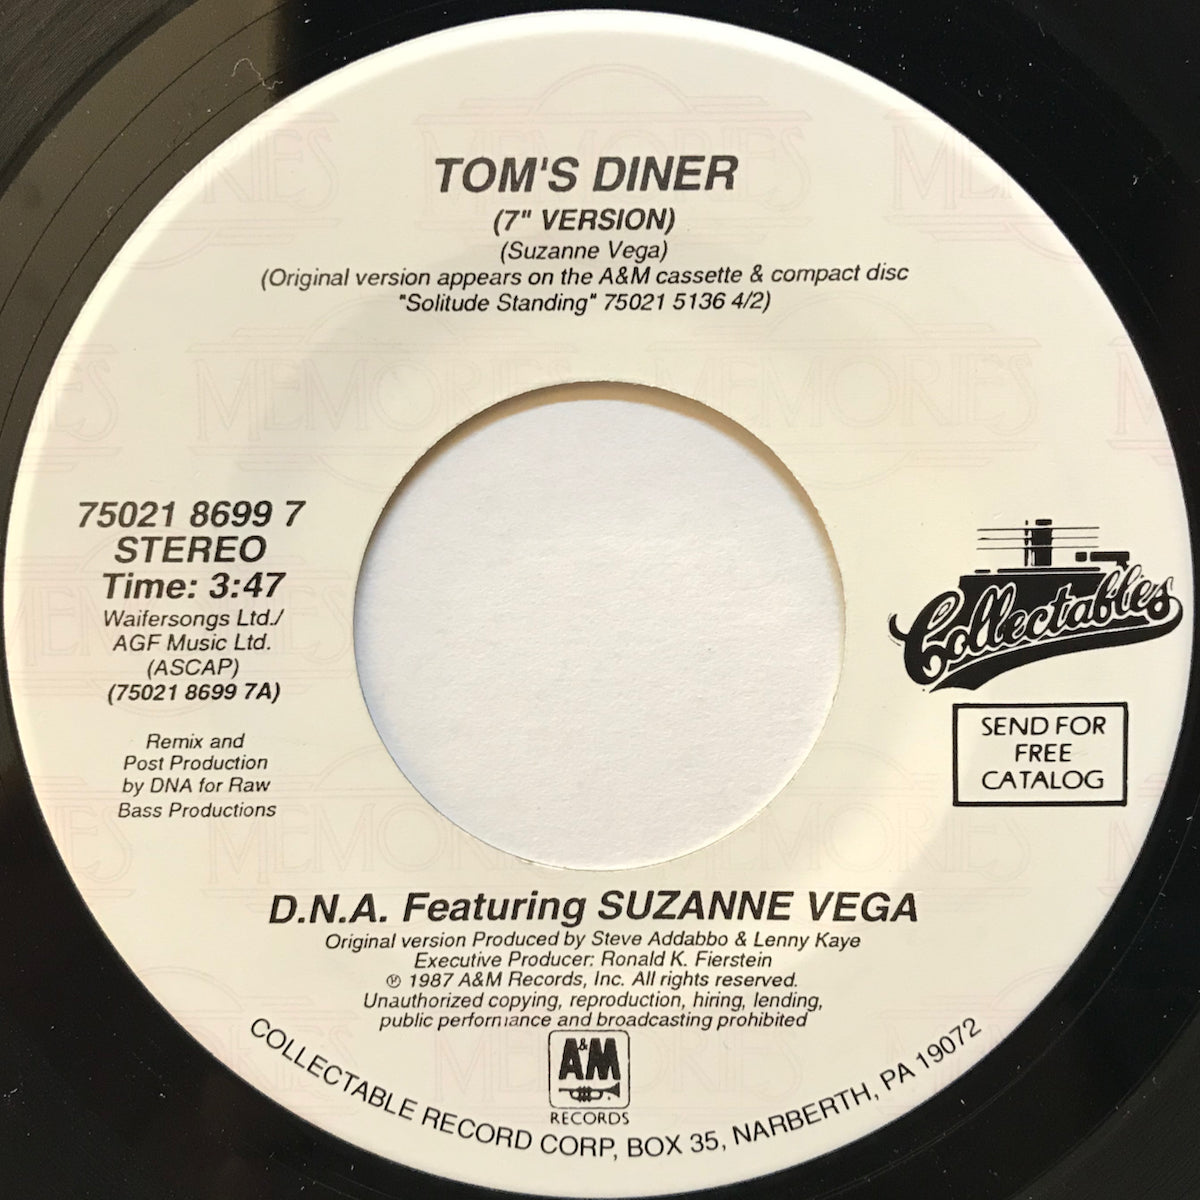 D.N.A. Featuring Suzanne Vega / Tom's Diner | VINYL7 RECORDS